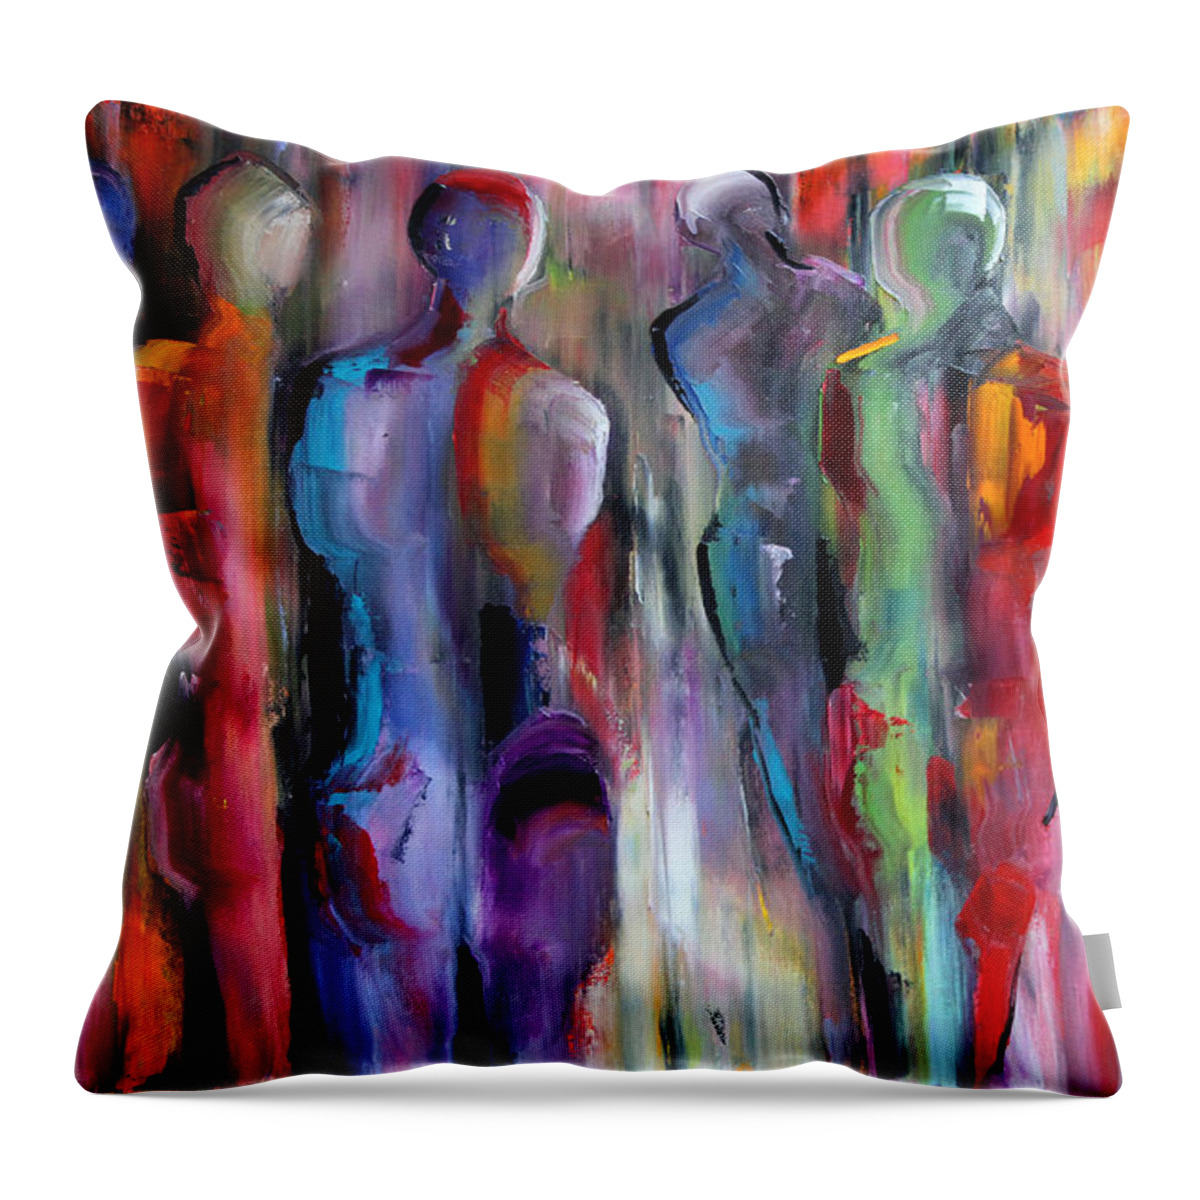 Figurative Painted Pull Throw Pillow featuring the painting Wanderers by Laurie Pace